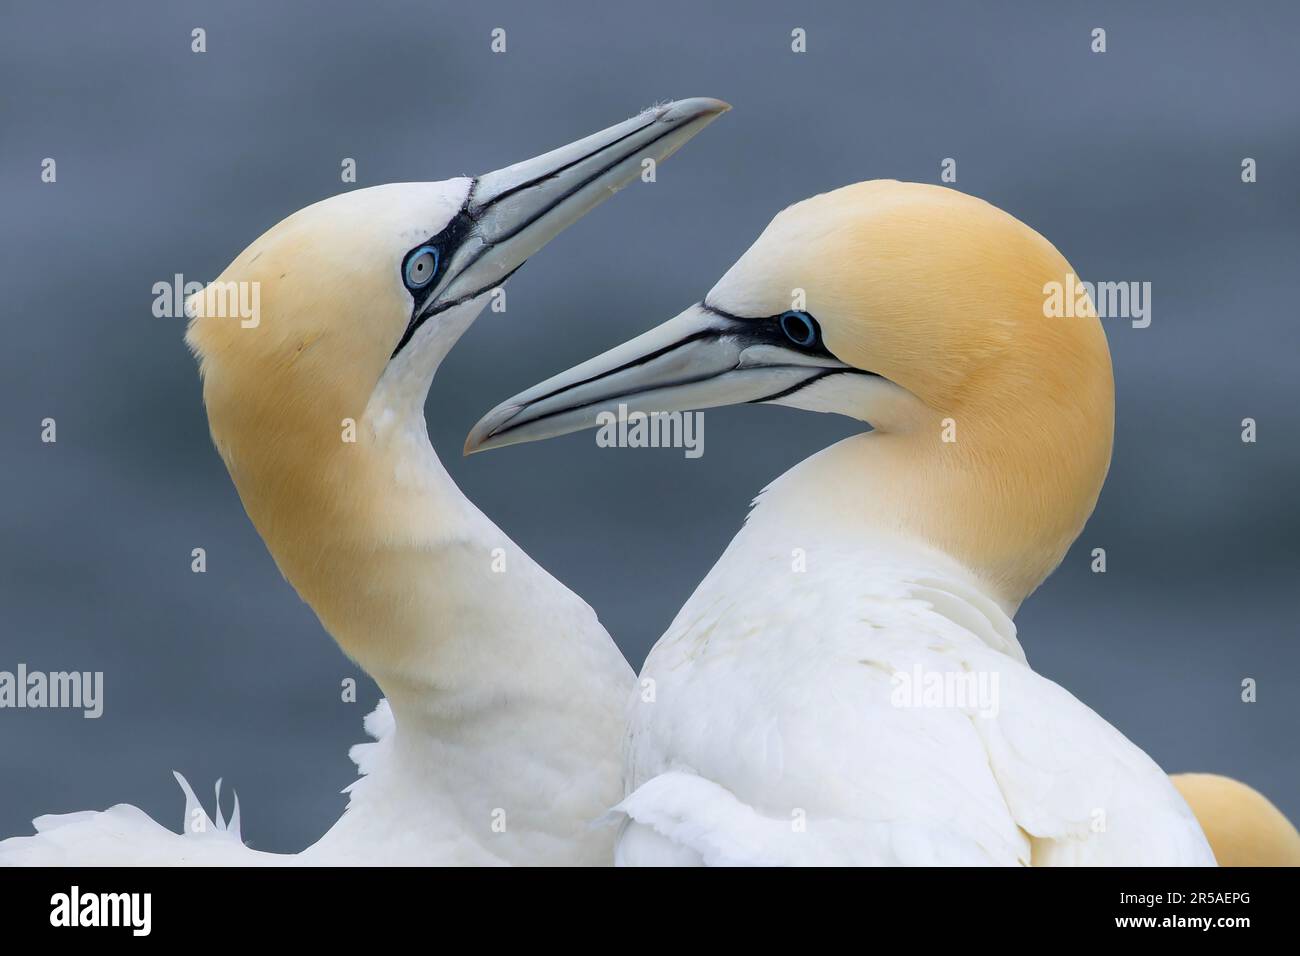 A pair of Northern Gannet. The right hand bird has a black iris indicating it has survived HPAI (Highly Pathogenic Avian Influenza) - Bird flu. Stock Photo